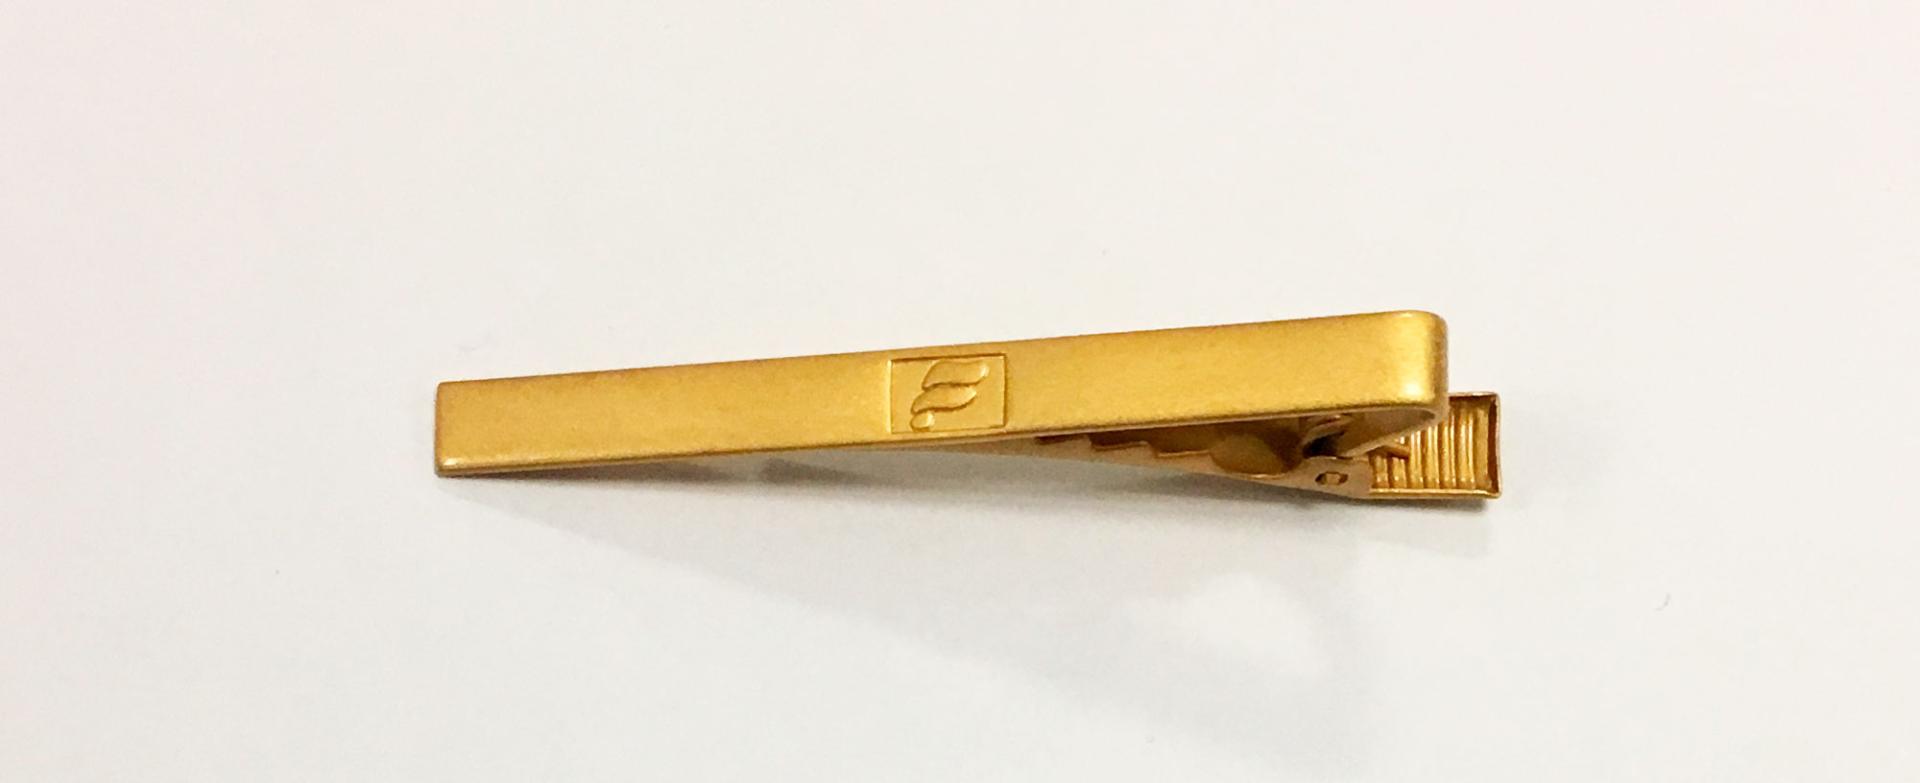 Gold-colored tie clip for Icelandair